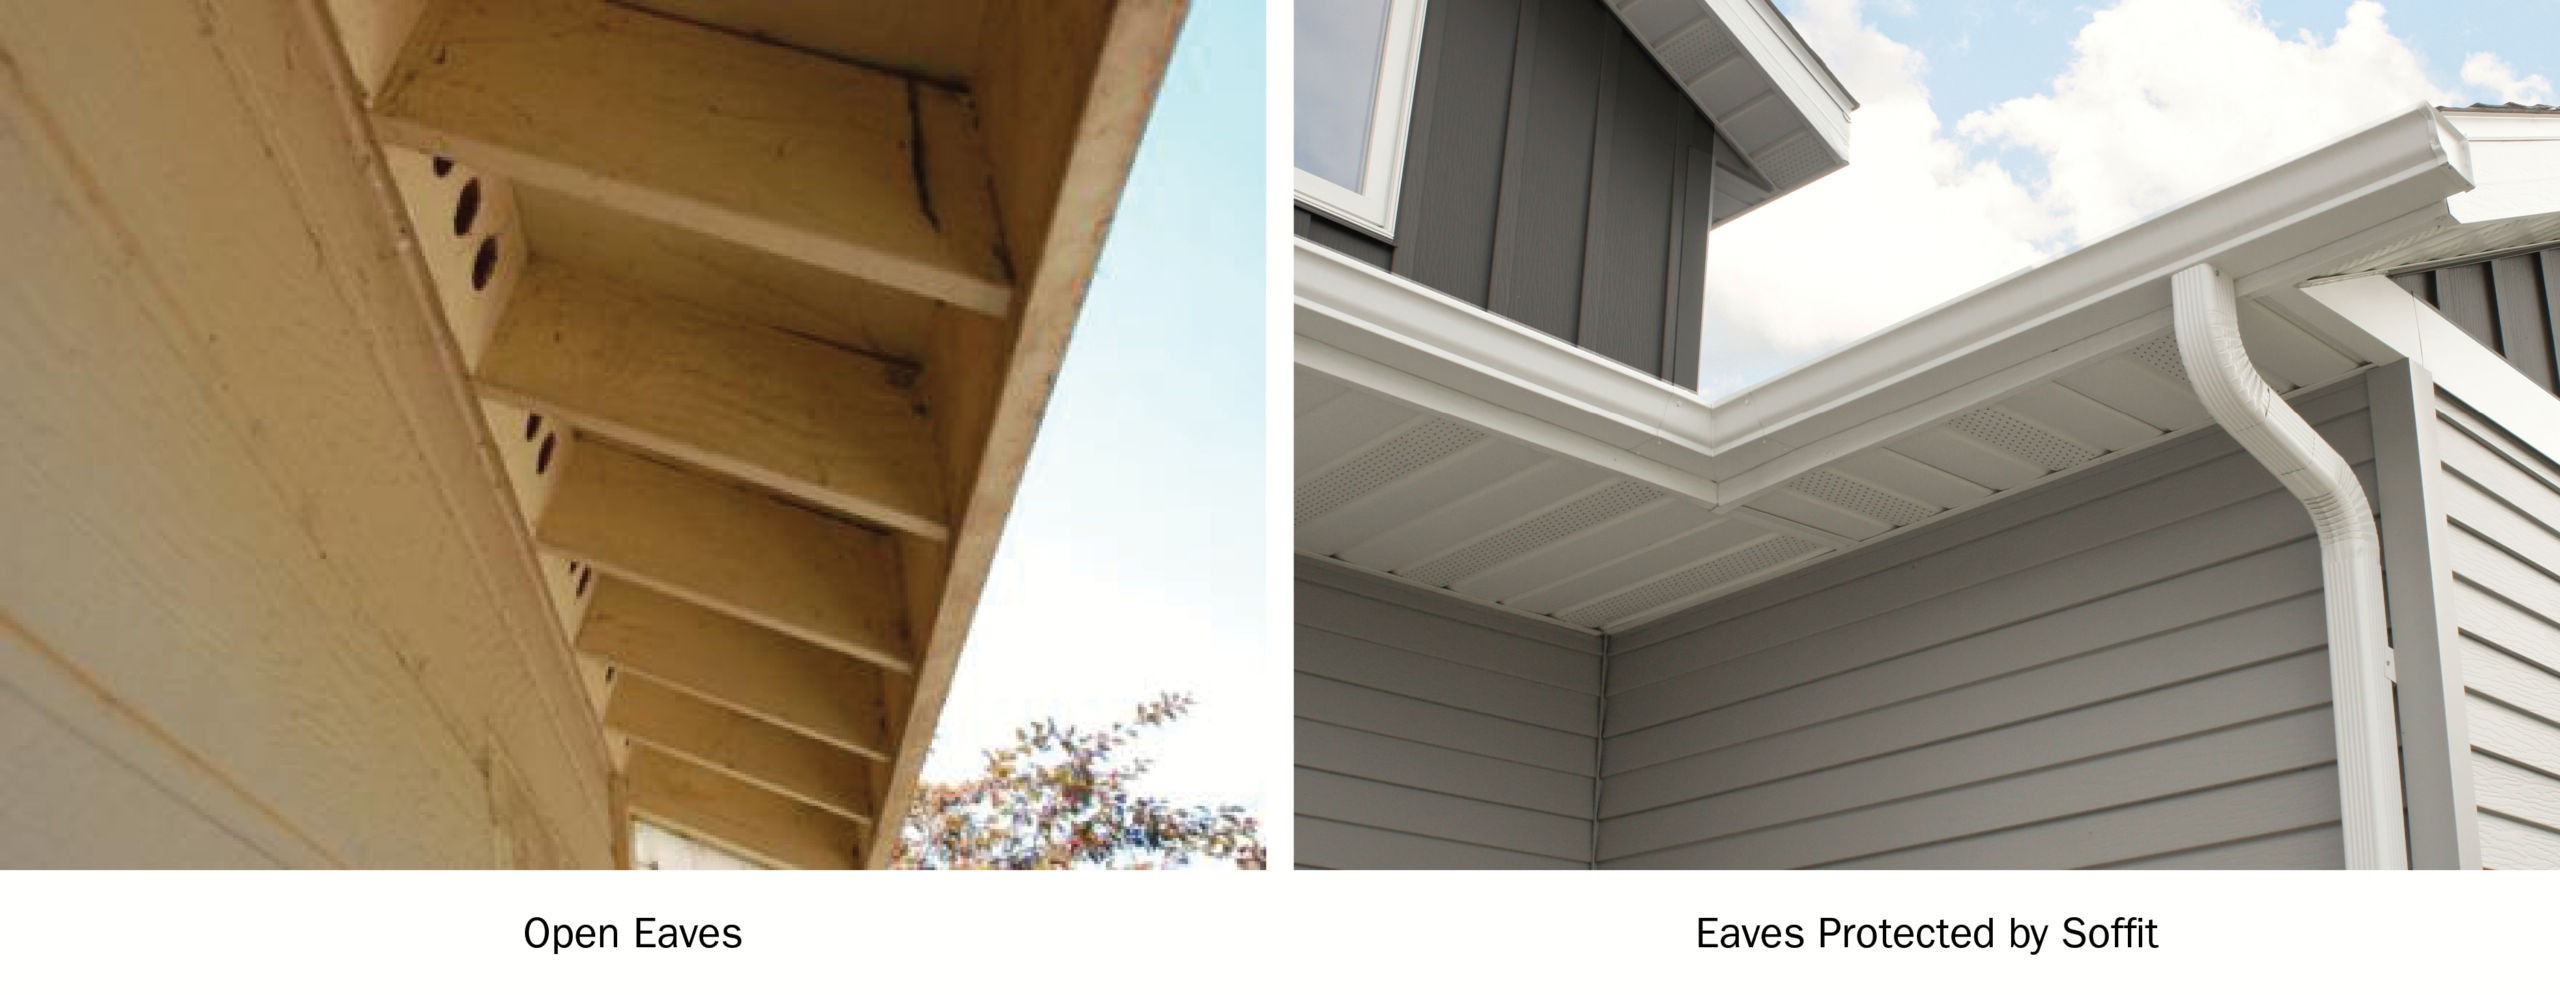 Collage of Home with Exposed Eaves vs. Eaves Protected with Soffit